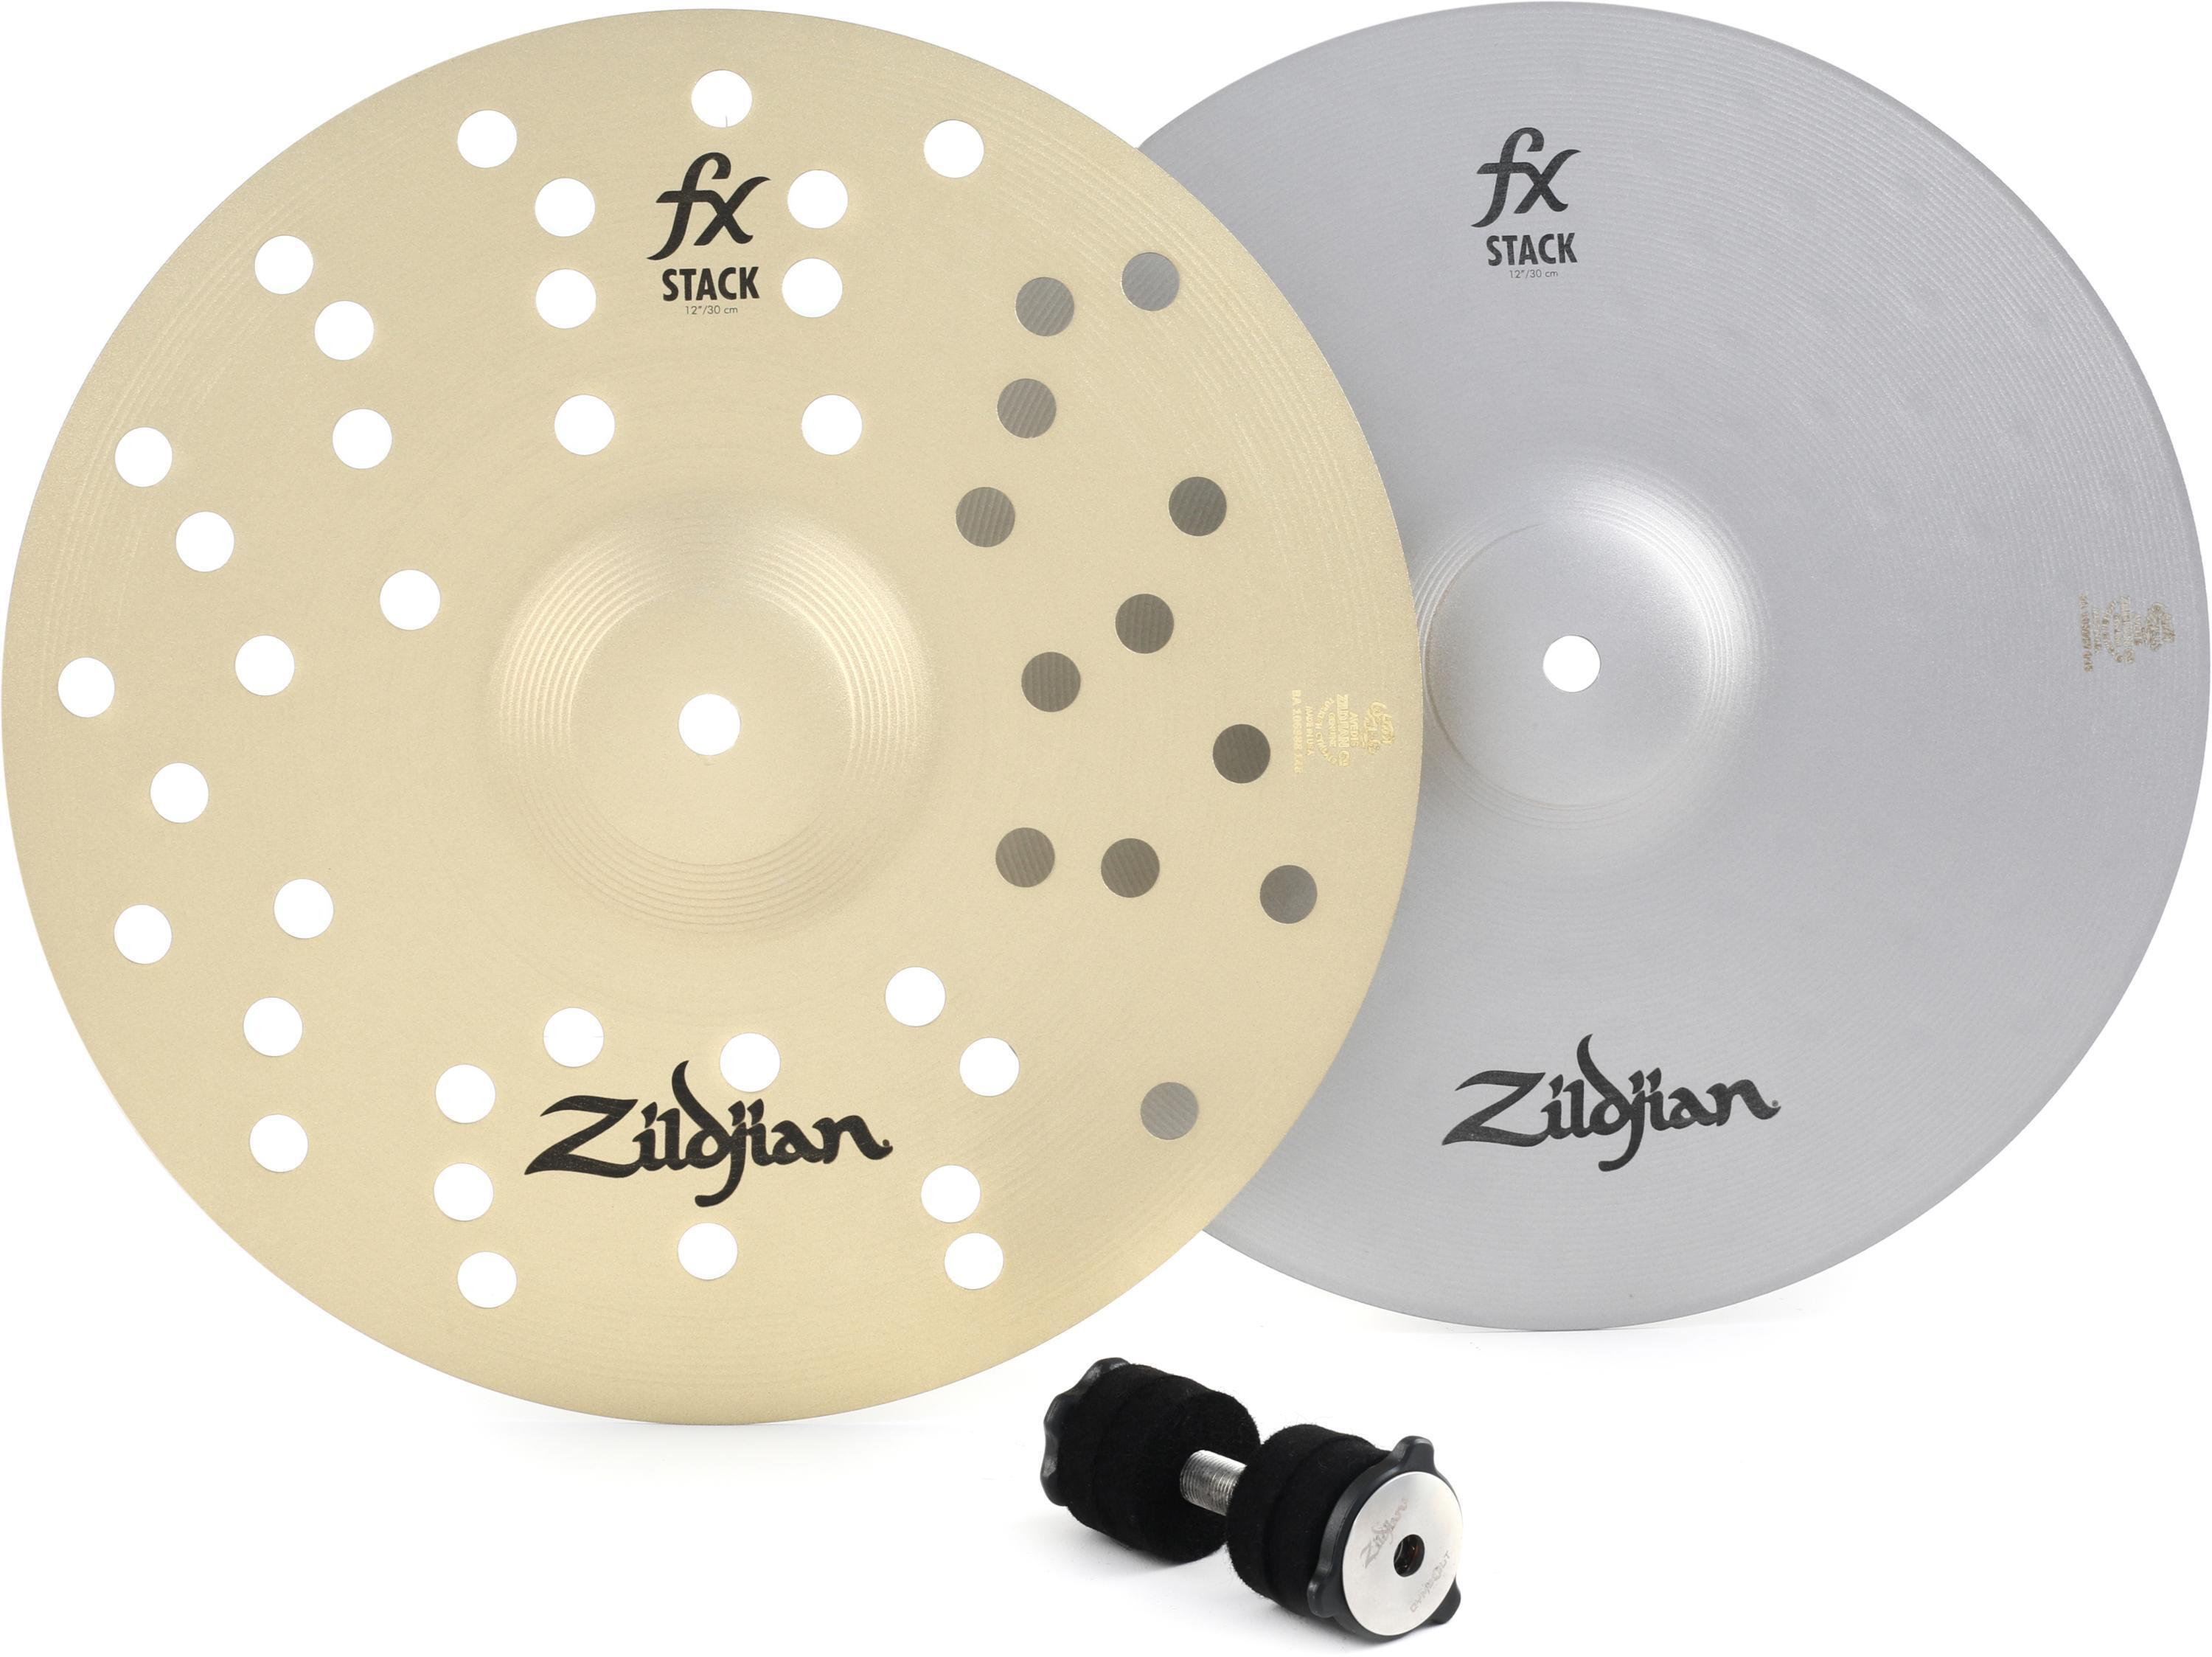 Zildjian 12-inch FX Stacks Cymbals with Cymbolt Mount | Sweetwater